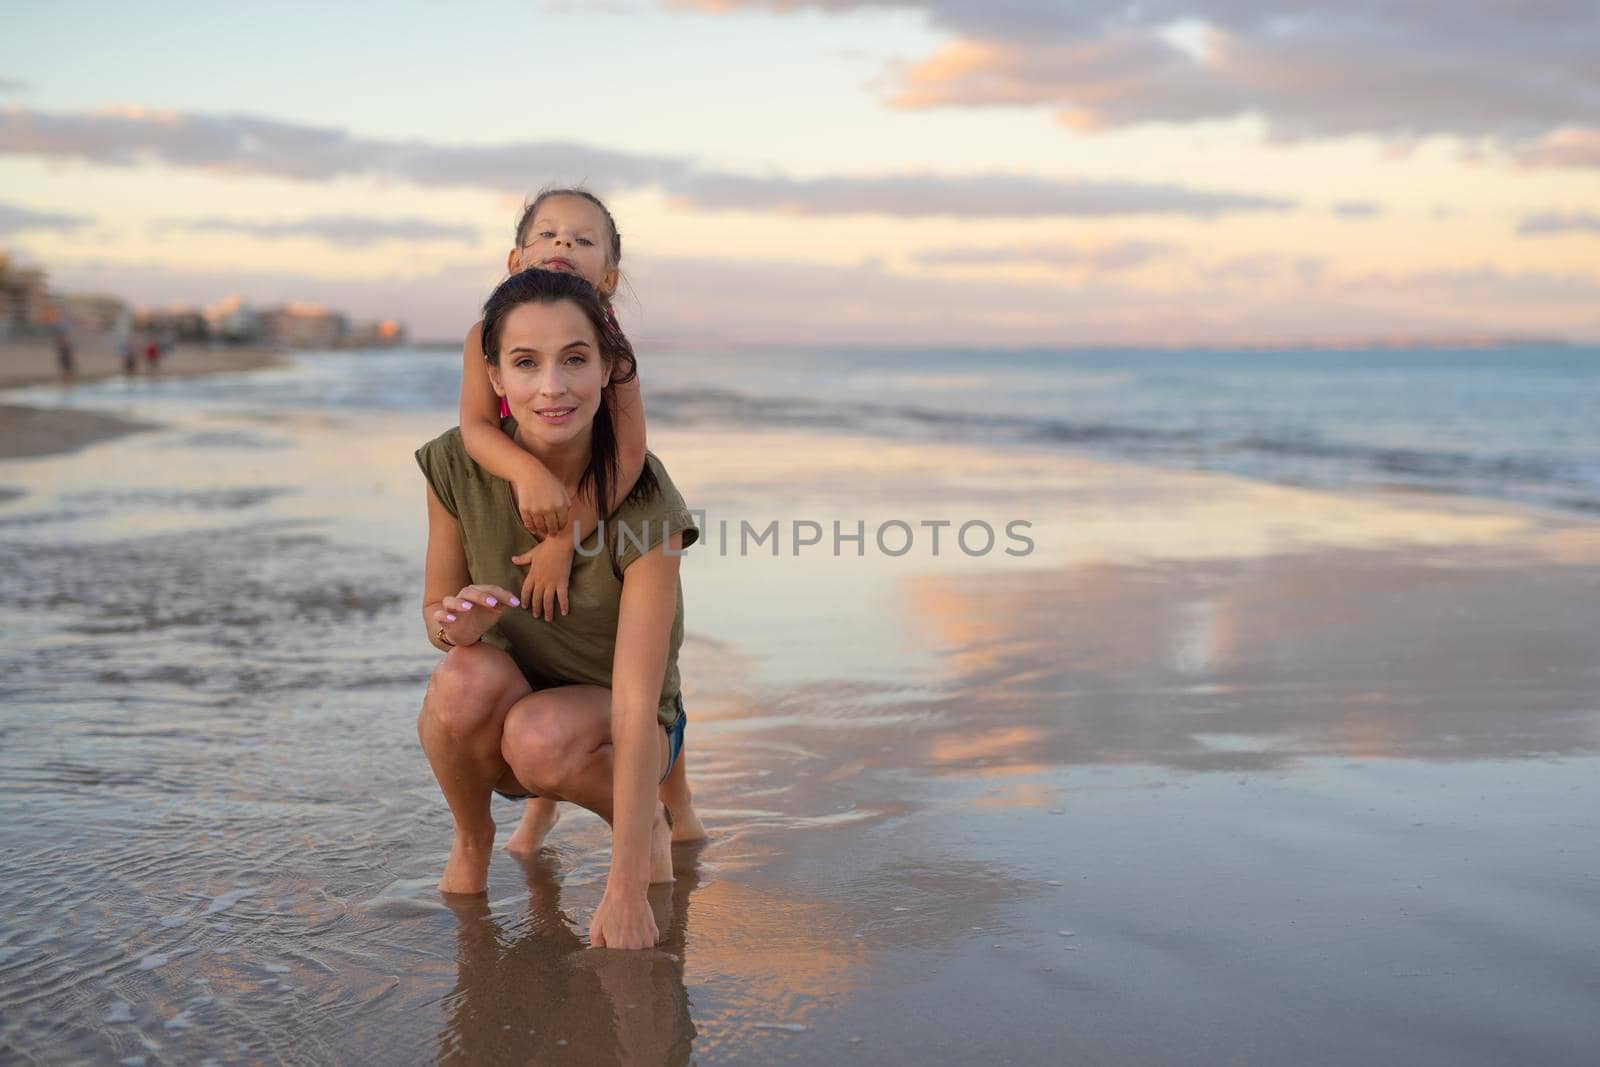 Happy family. Young happy beautiful mother and her daughter having fun on the beach at sunset. Positive human emotions, feelings.